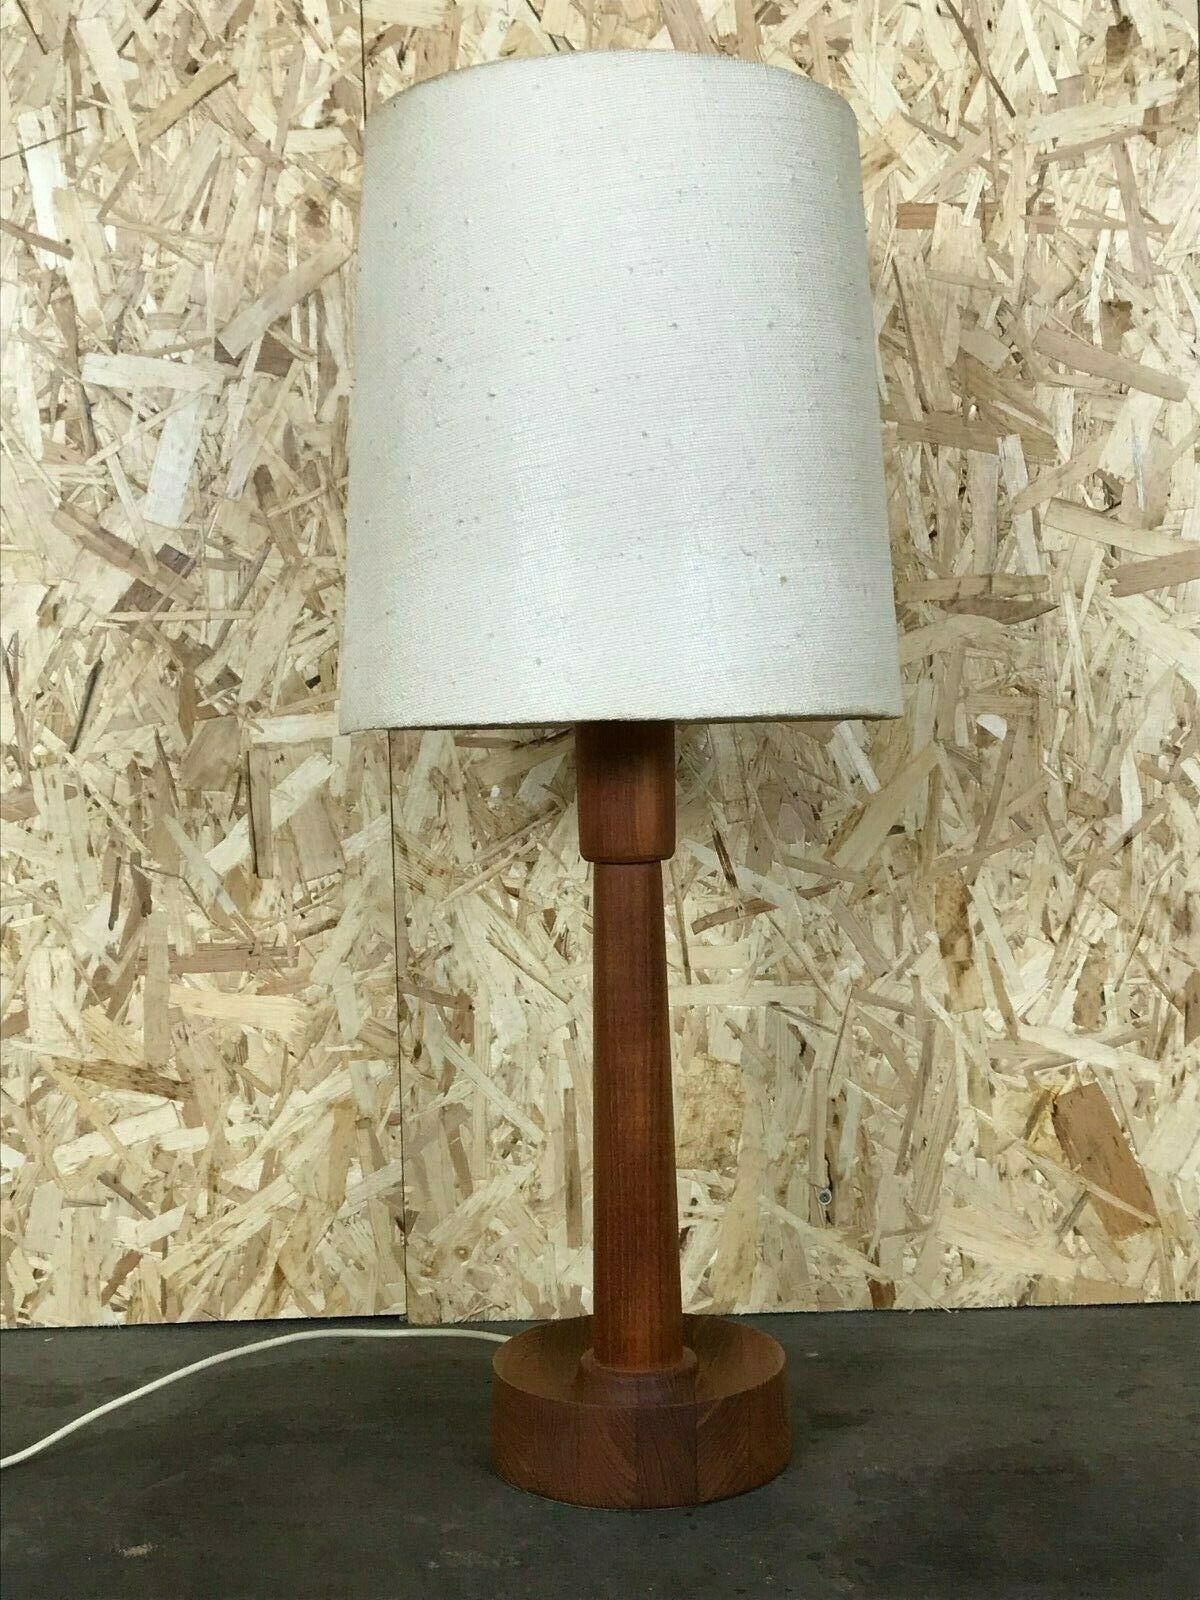 60s 70s lamp light table lamp teak space age Danish design 60s 70s

Object: table lamp

Manufacturer:

Condition: good

Age: around 1960-1970

Dimensions:

Height = 84cm
Diameter = 36cm

Other notes:

The pictures serve as part of